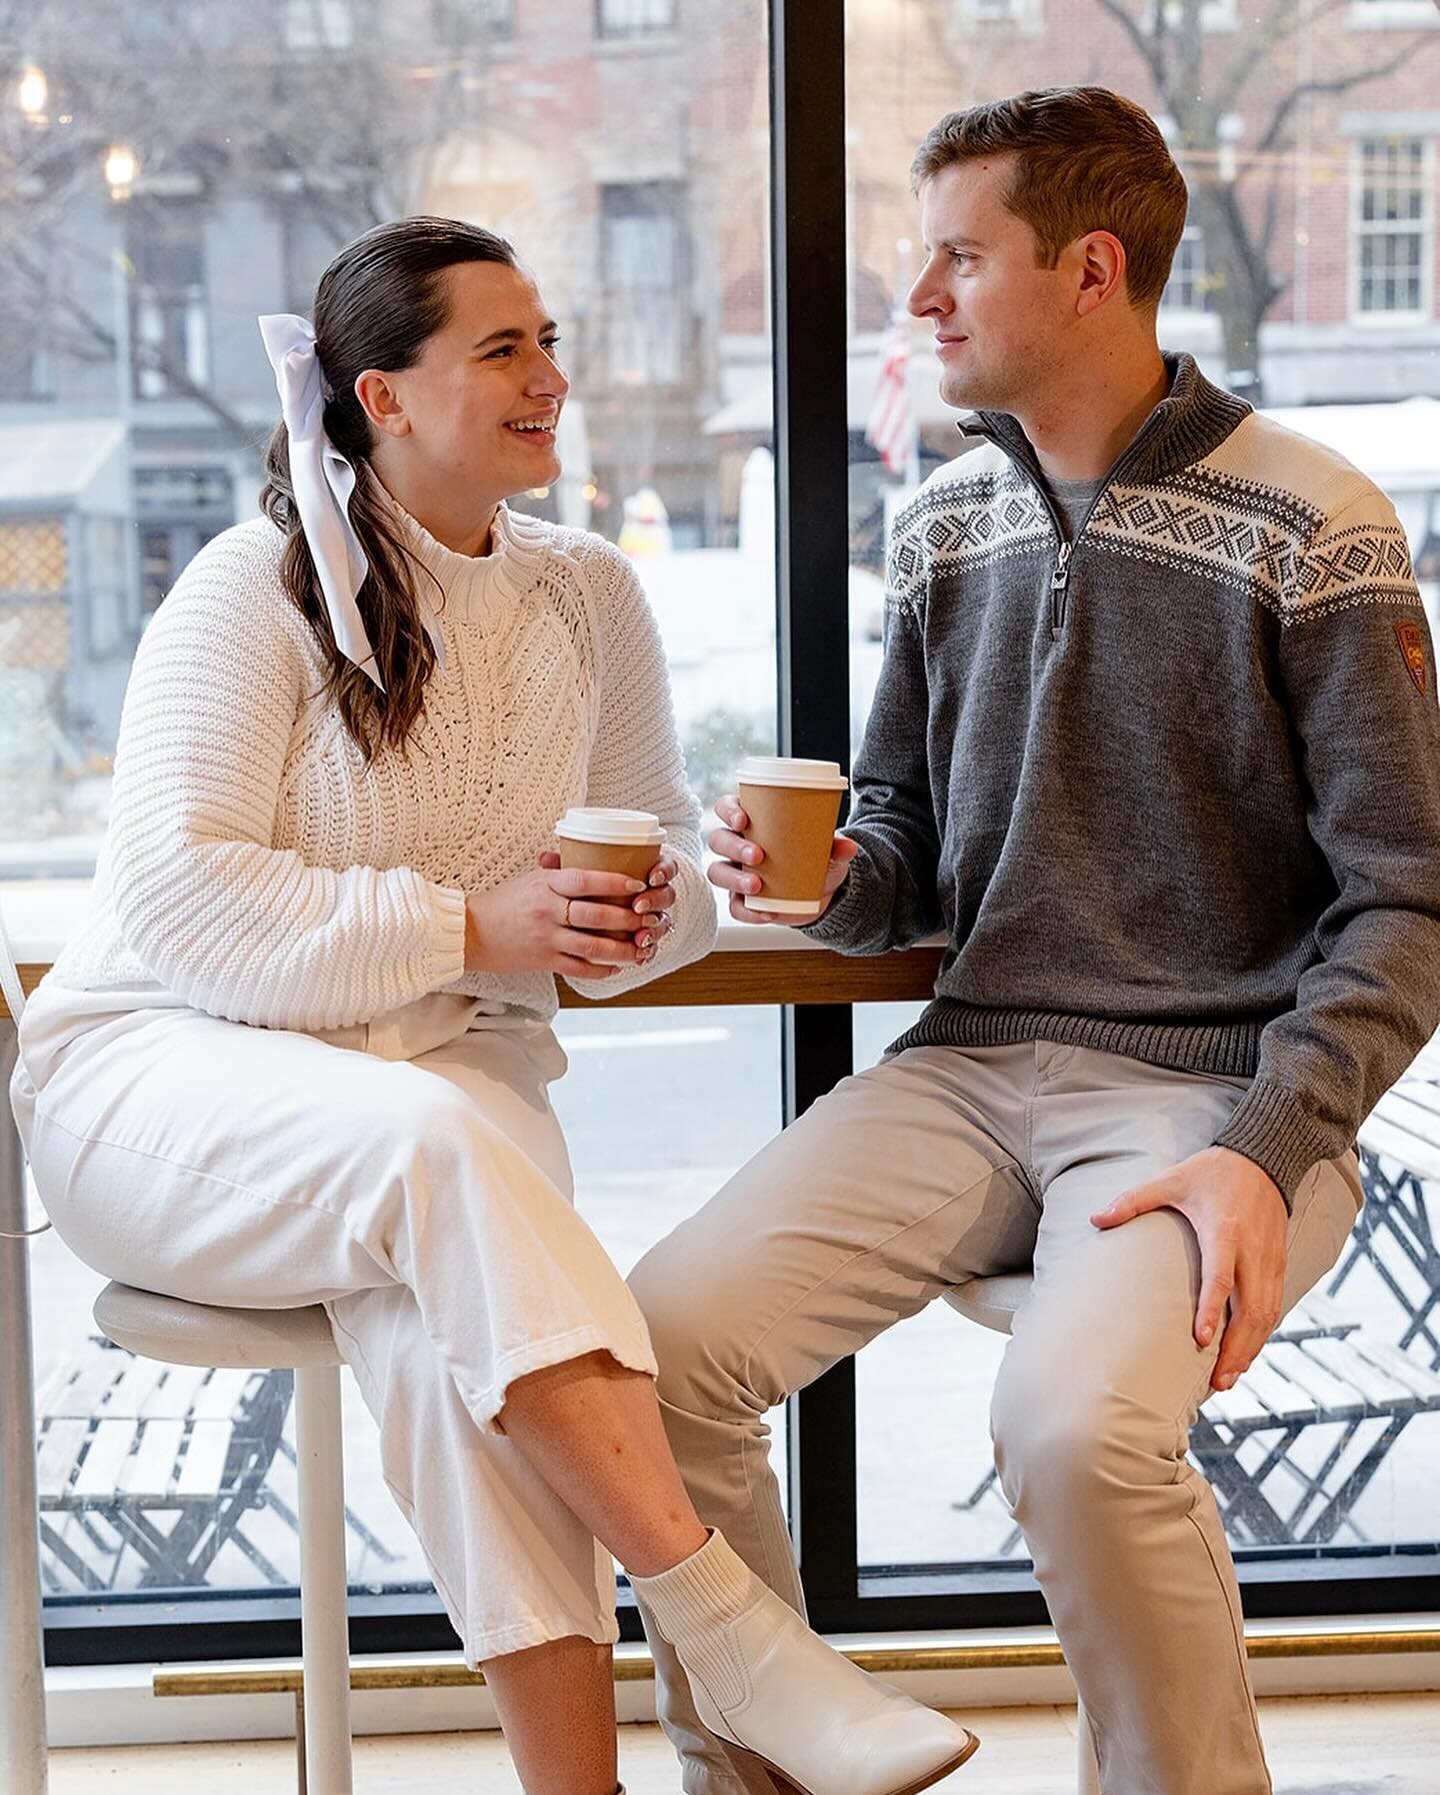 happy valentine&rsquo;s day 💞💌☕️ feeling grateful for all of the love in my life from family, friends and of course my favorite person to drink coffee with in the morning ✨

📸 @kateedwardsweddings 

#valentinesday #vday #engagementshoot #engagemen